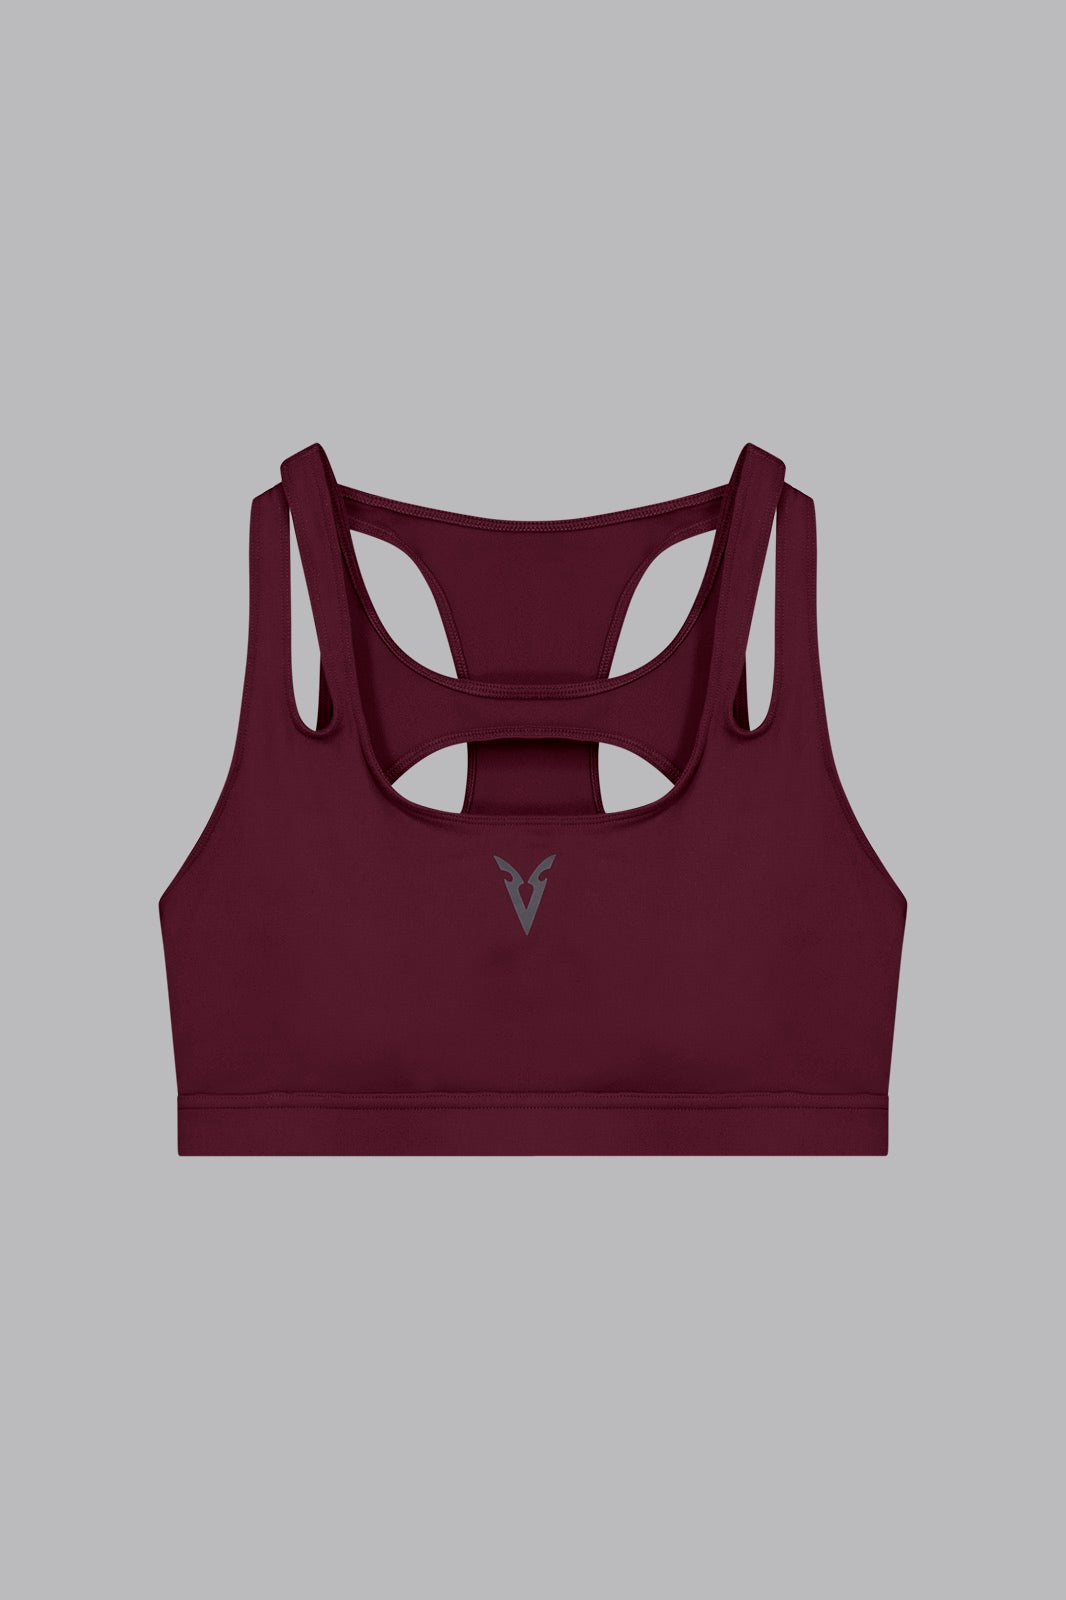 New Look Front Open Smooth Cotton Sports Bra Bra Pack Of ( 1 )-Maroon